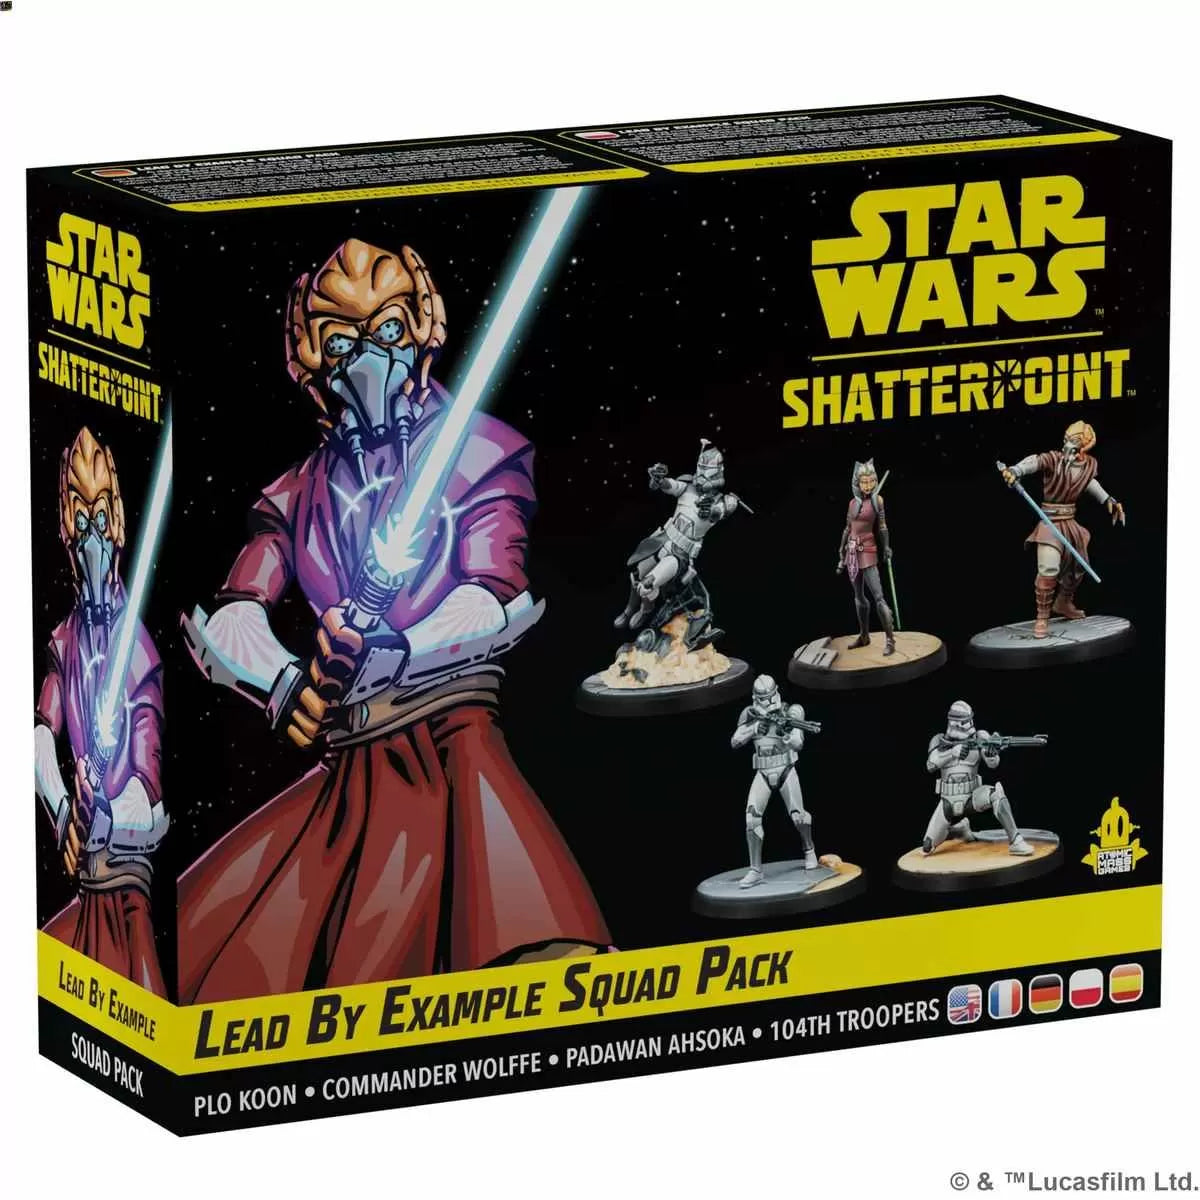 Star Wars Shatterpoint: Lead by Example Plo Koon Squad Pack